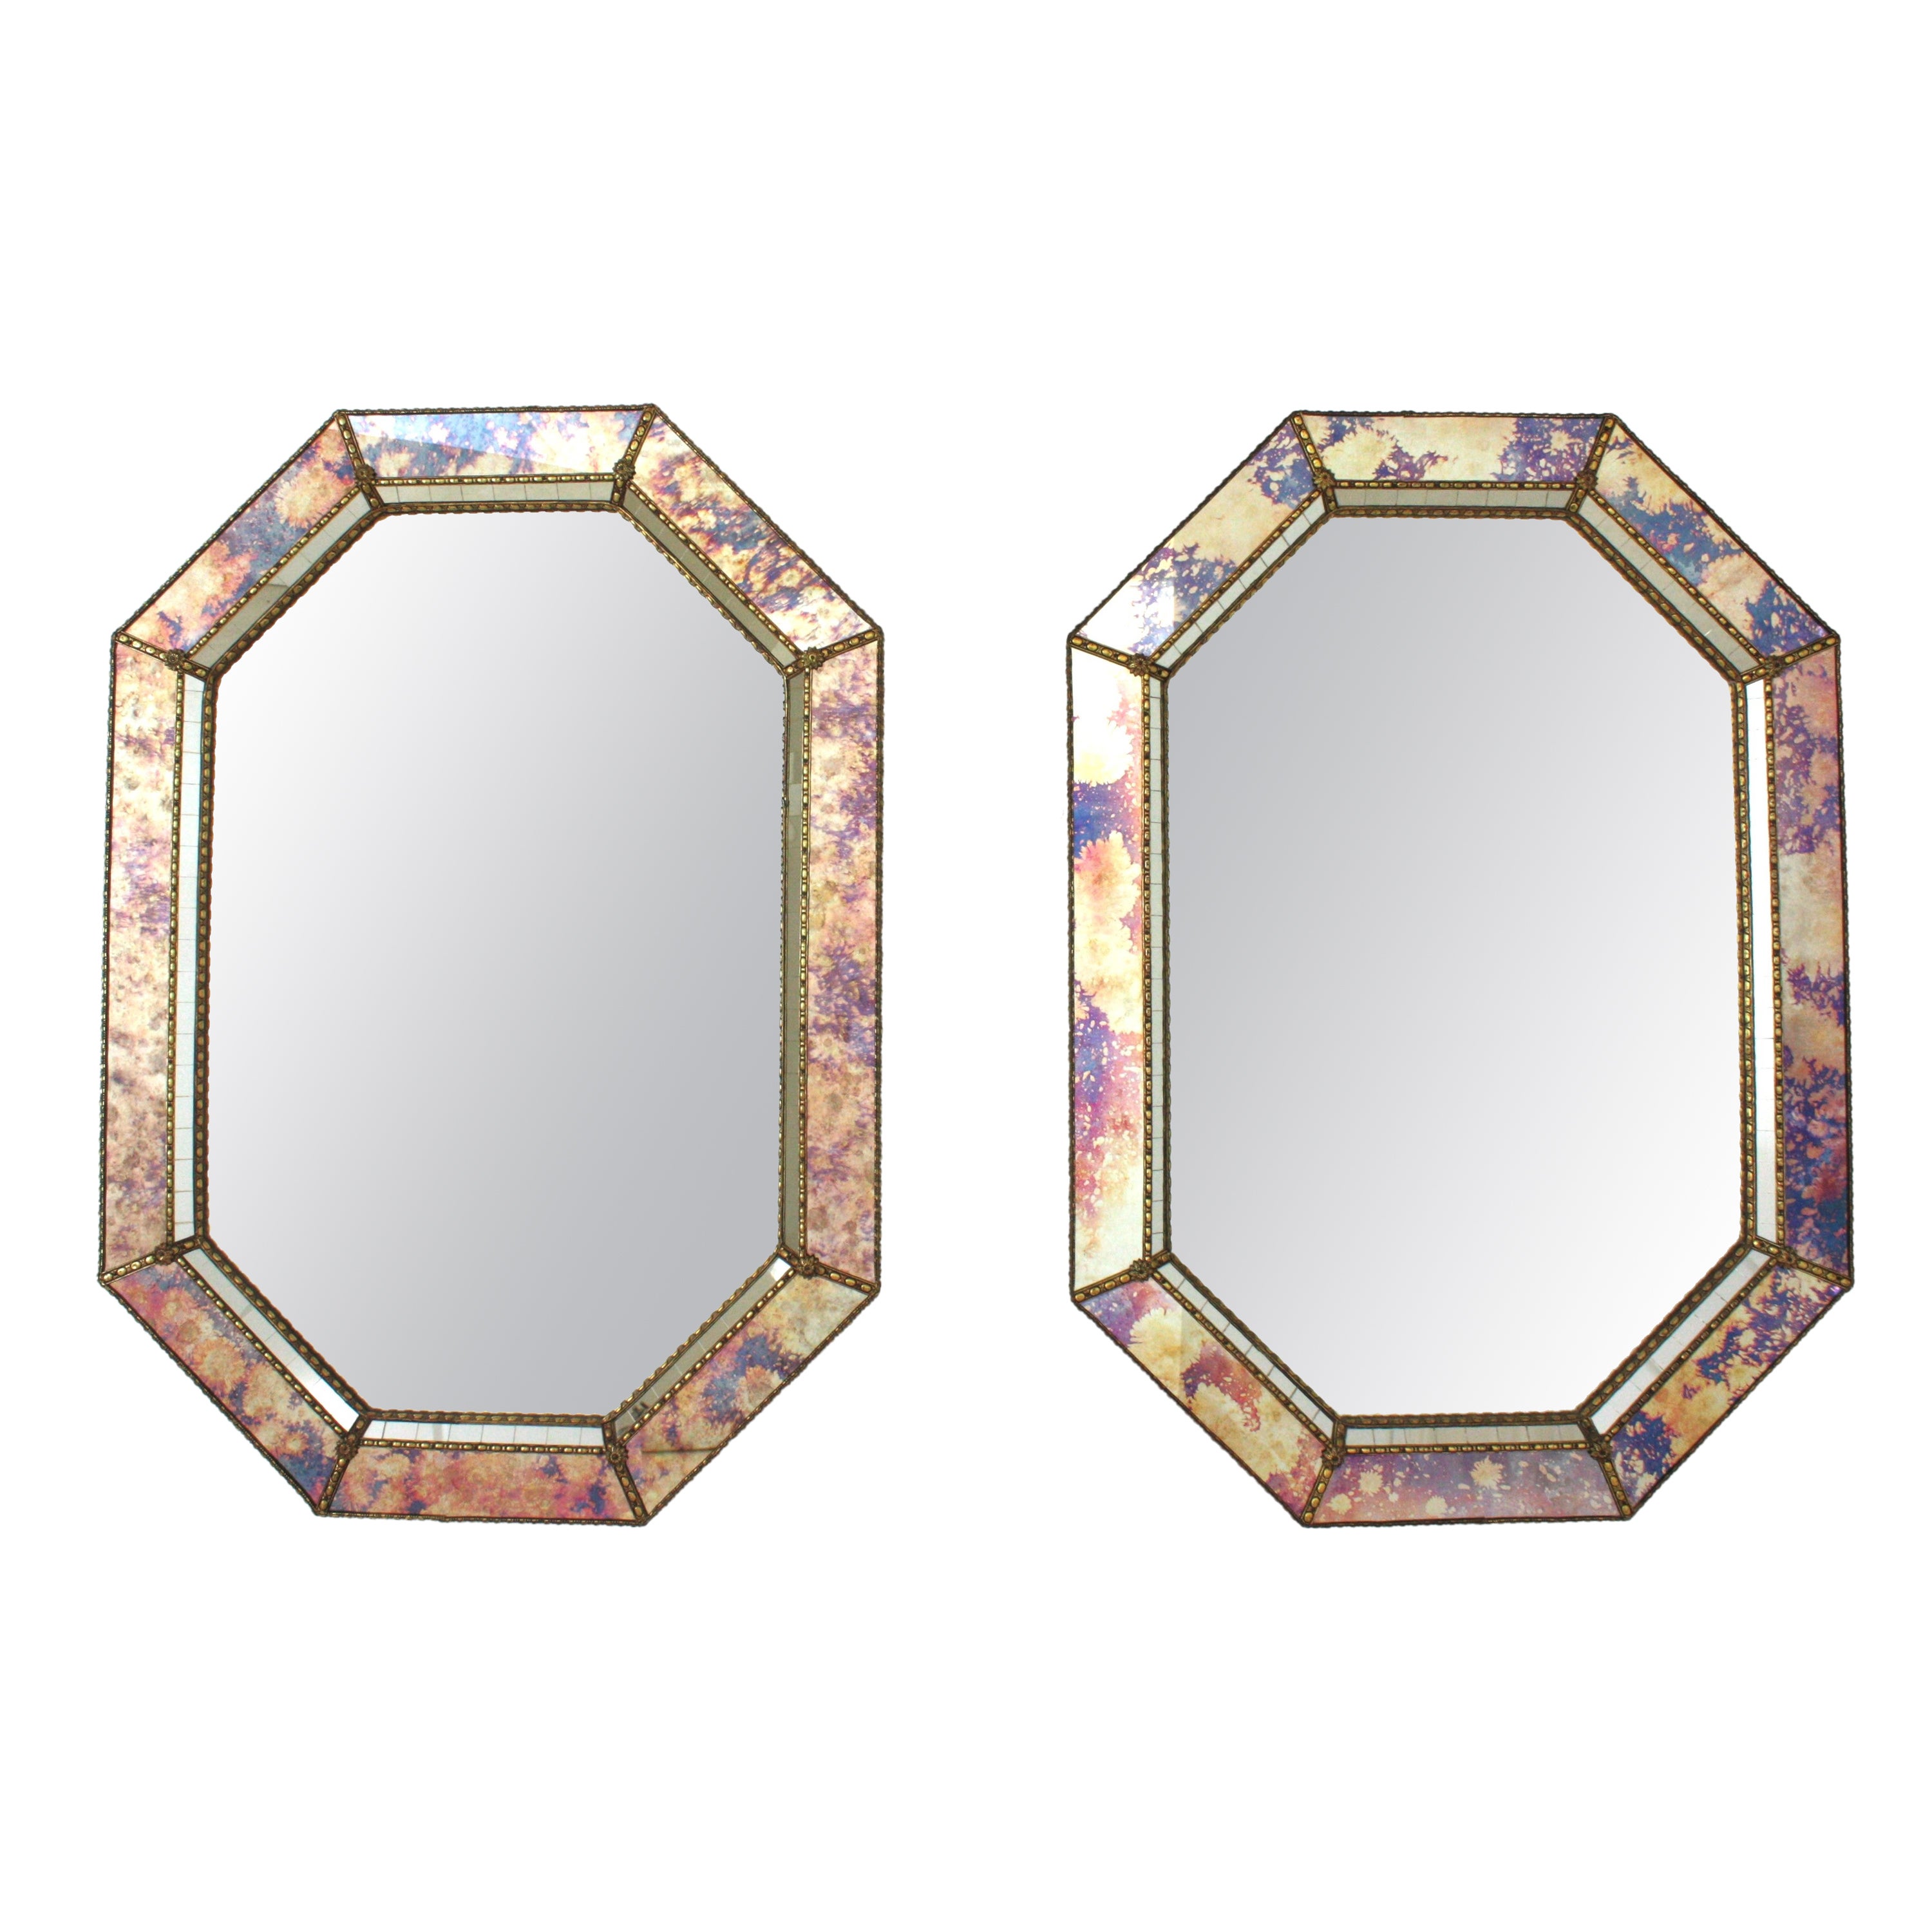 Octagonal Venetian Style Mirrors with Pink Purple Glass & Brass Details, Pair